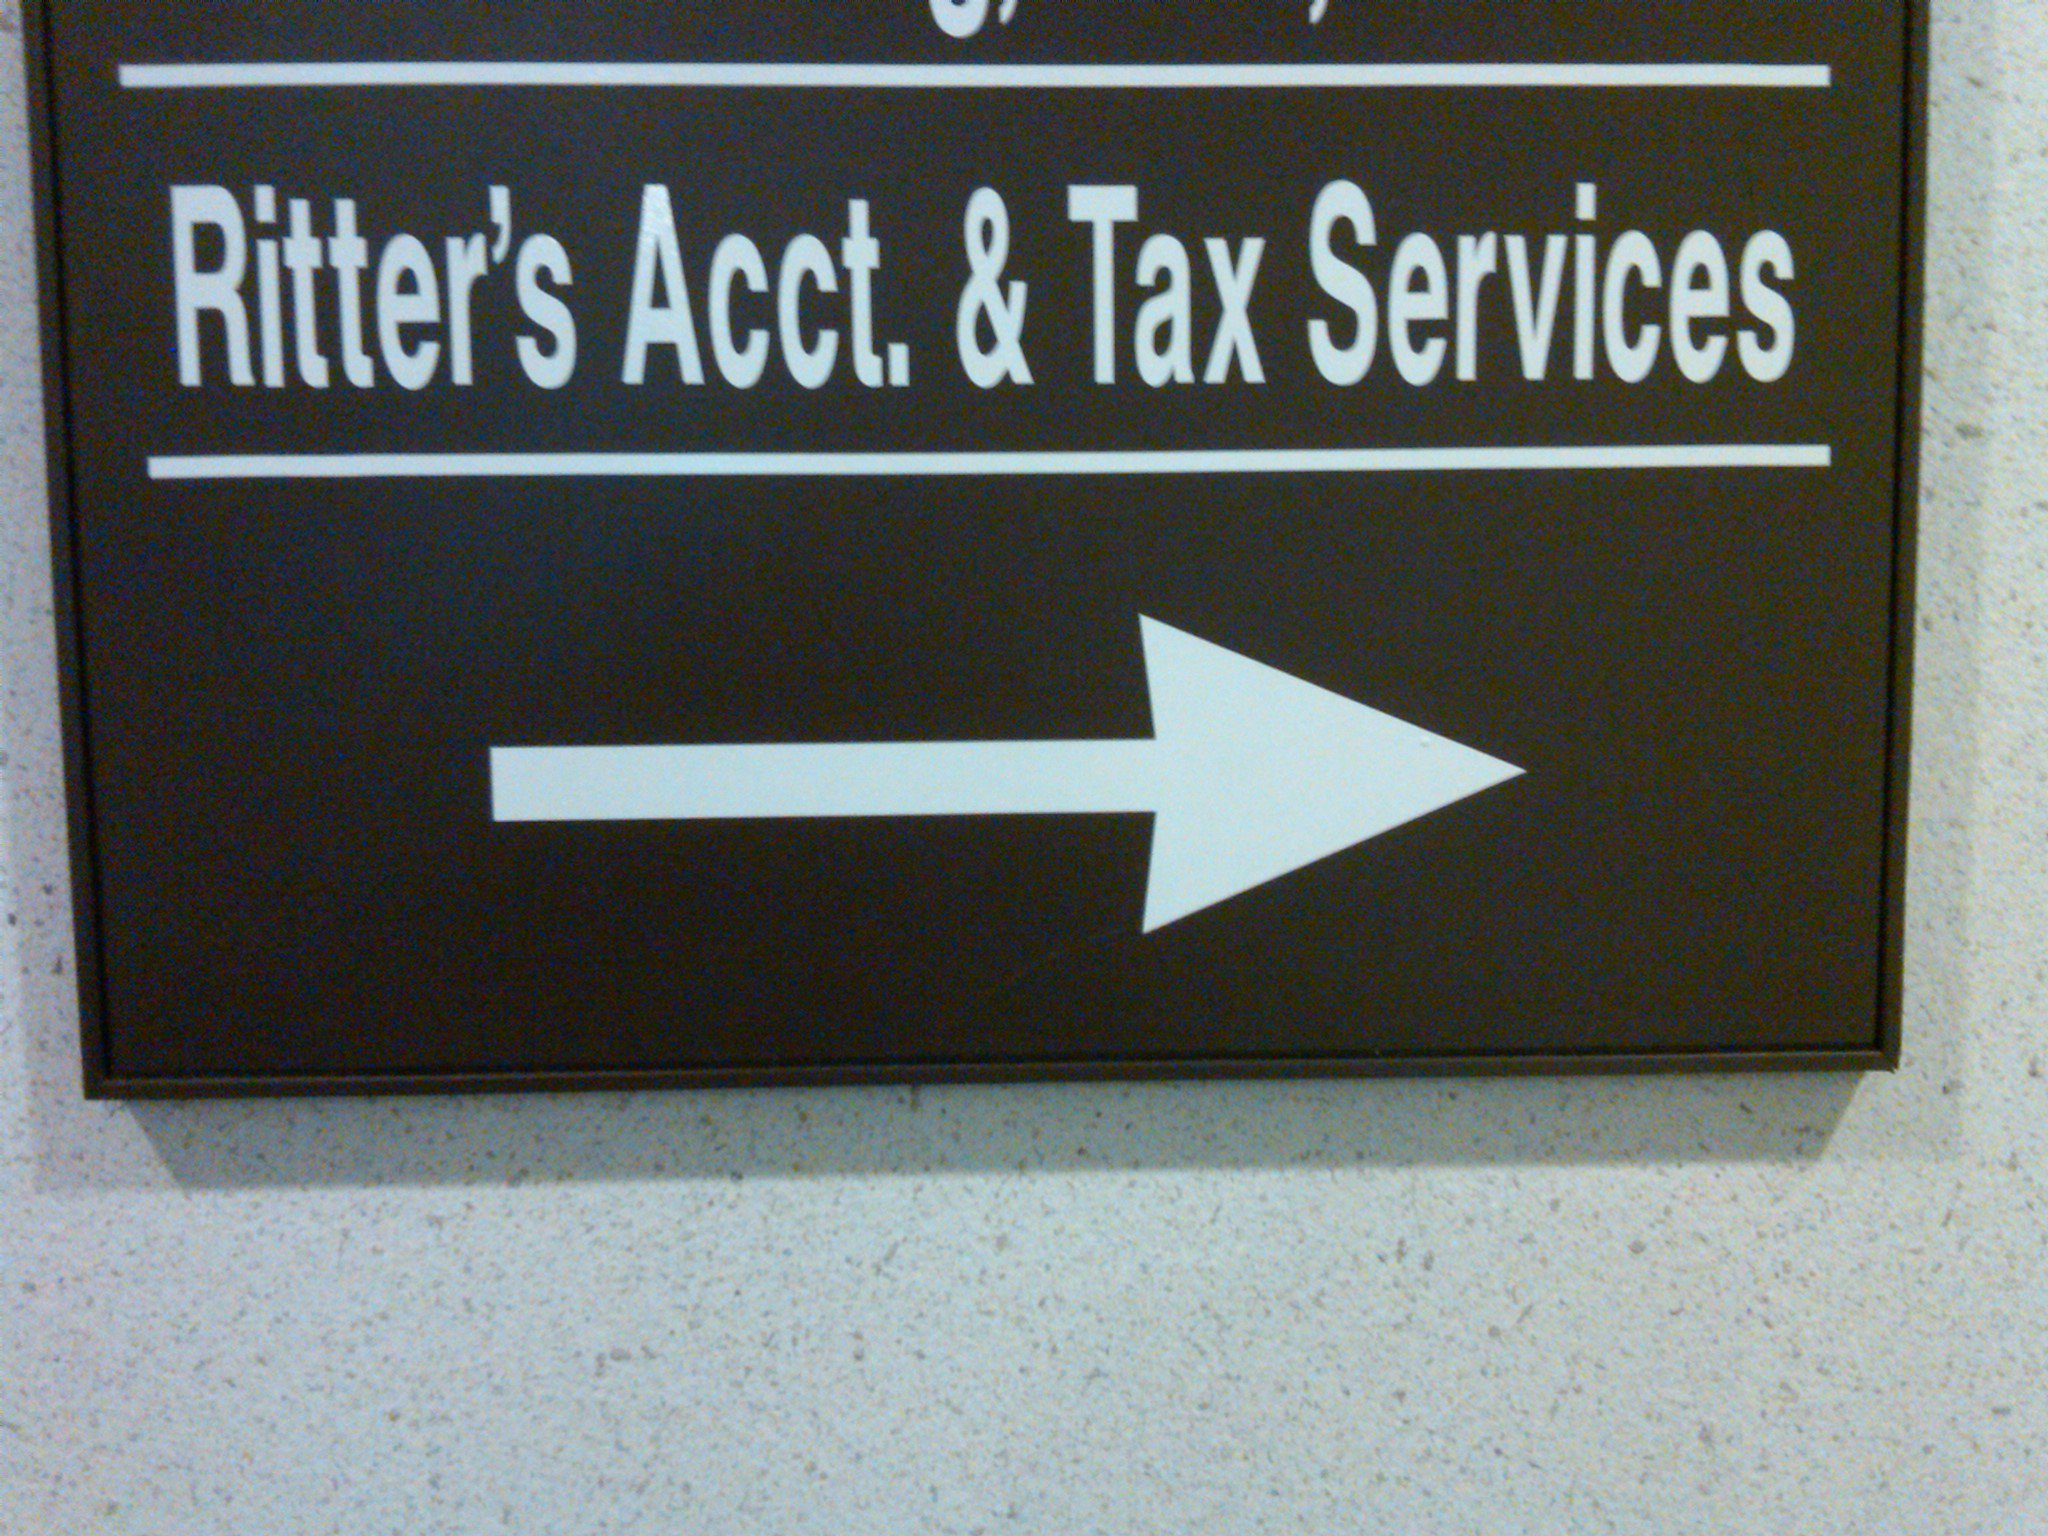 Ritter's Accounting & Tax Services 7527 Buckley Rd, North Syracuse New York 13212